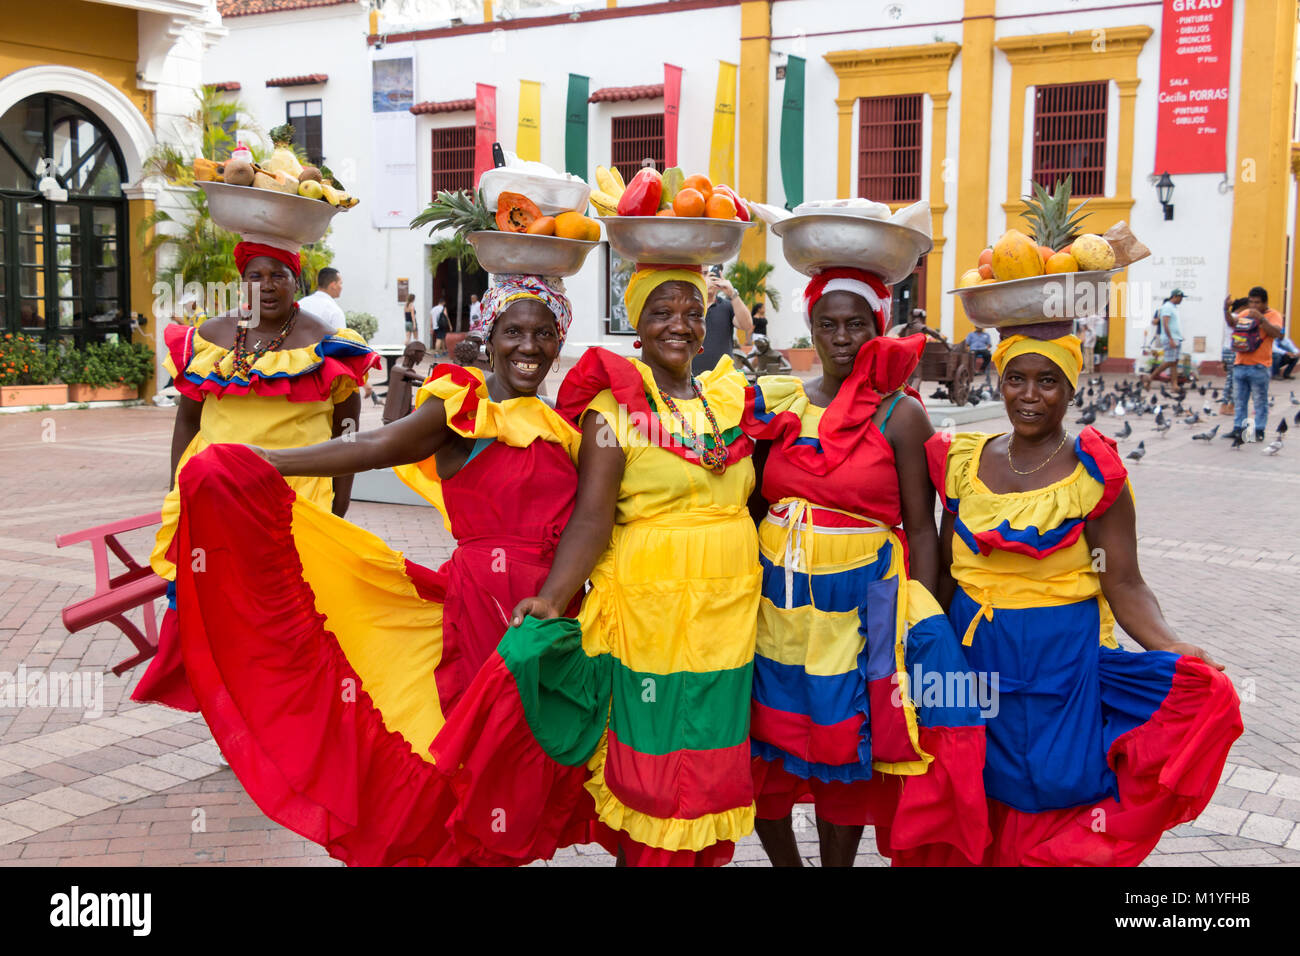 Cartagena, Colombia - January 23th, 2018: Five palenqueras with a metal basket with fruits are posing showing their multicolor traditional dress at th Stock Photo